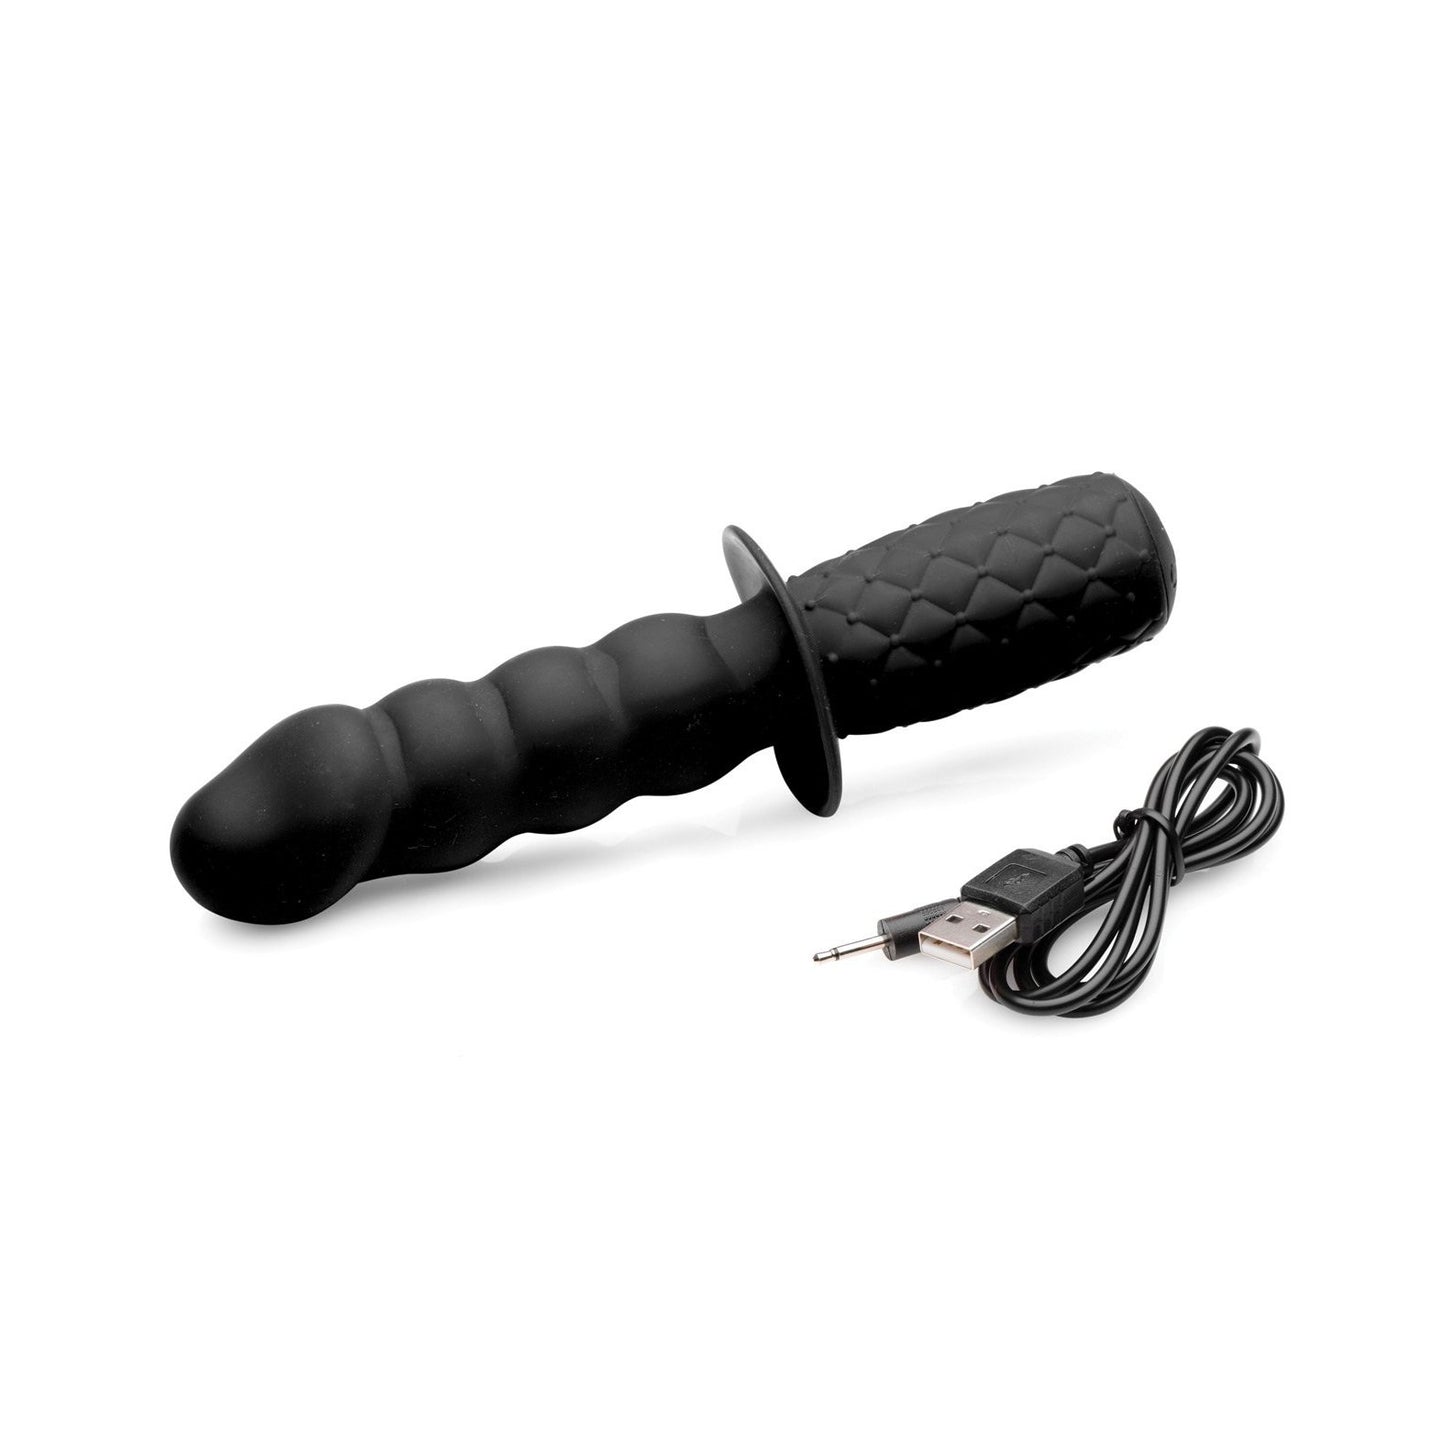 Ass Thumpers The Handler 10x Silicone Vibrating Thruster